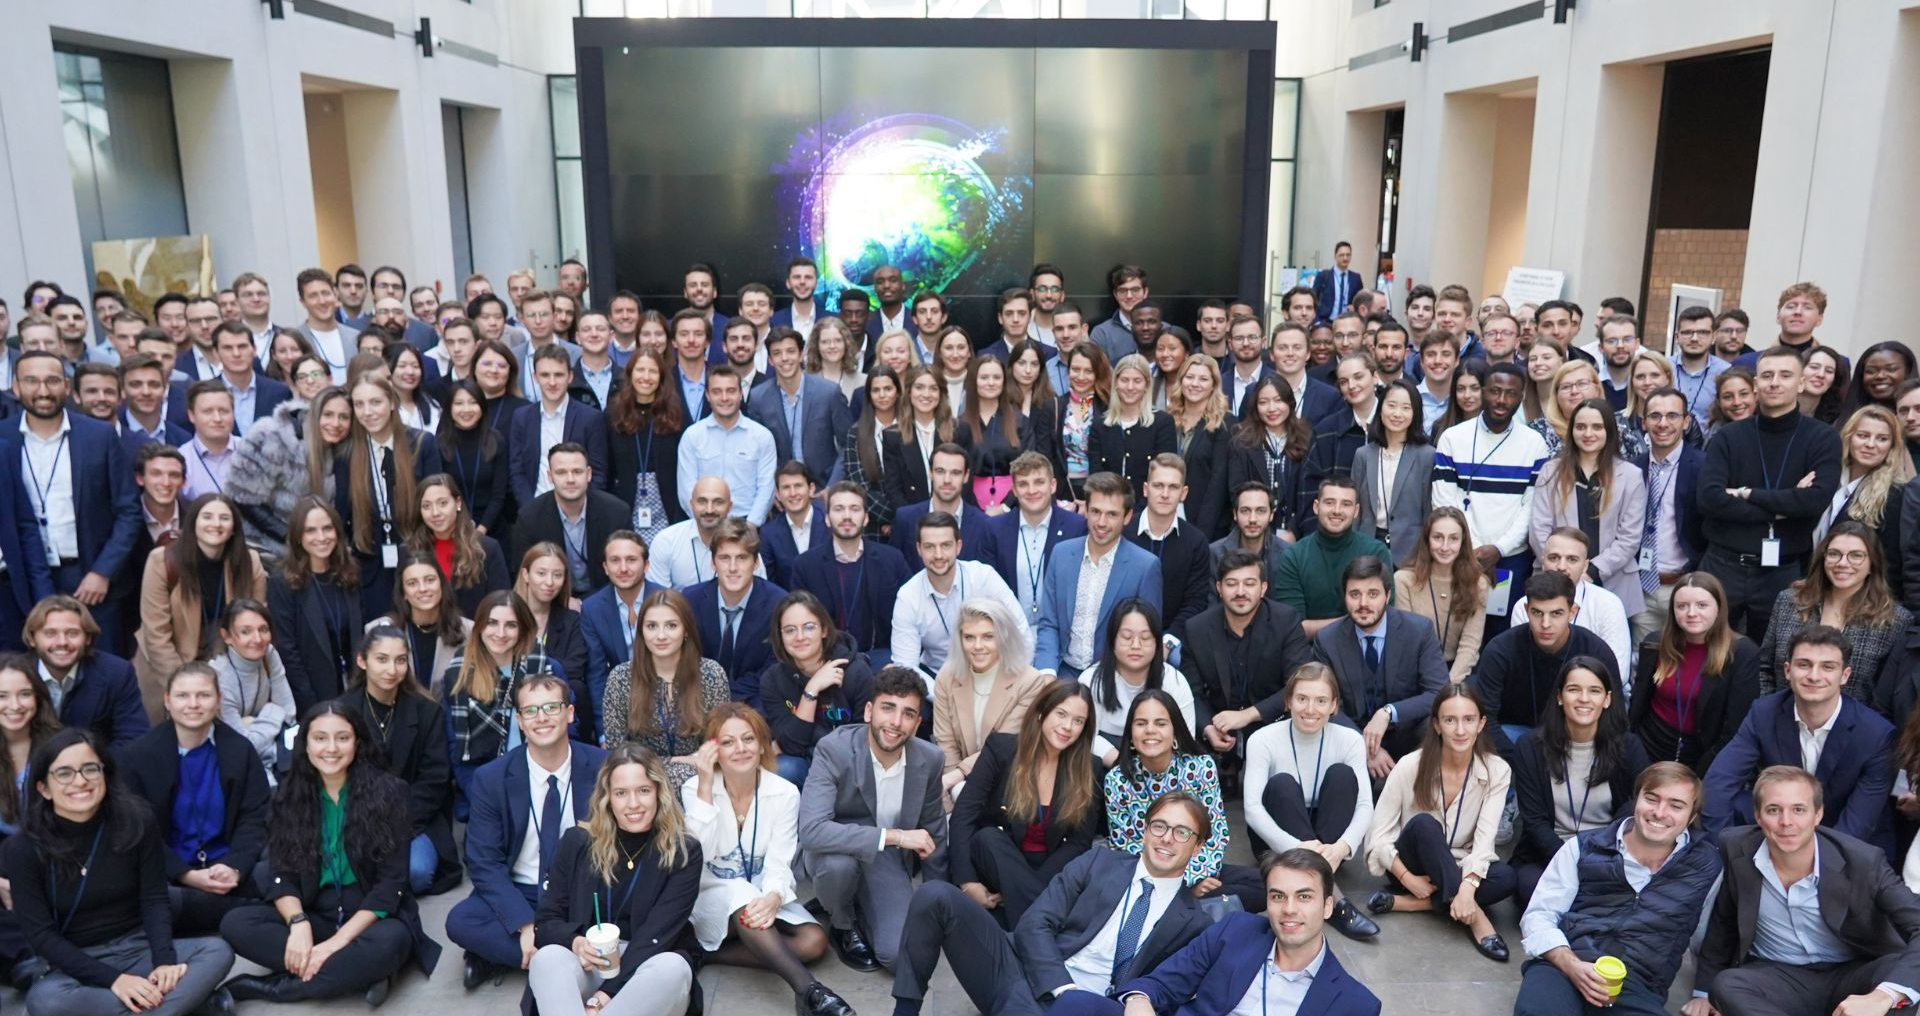 Deloitte induction: “Hello” from the Metaverse